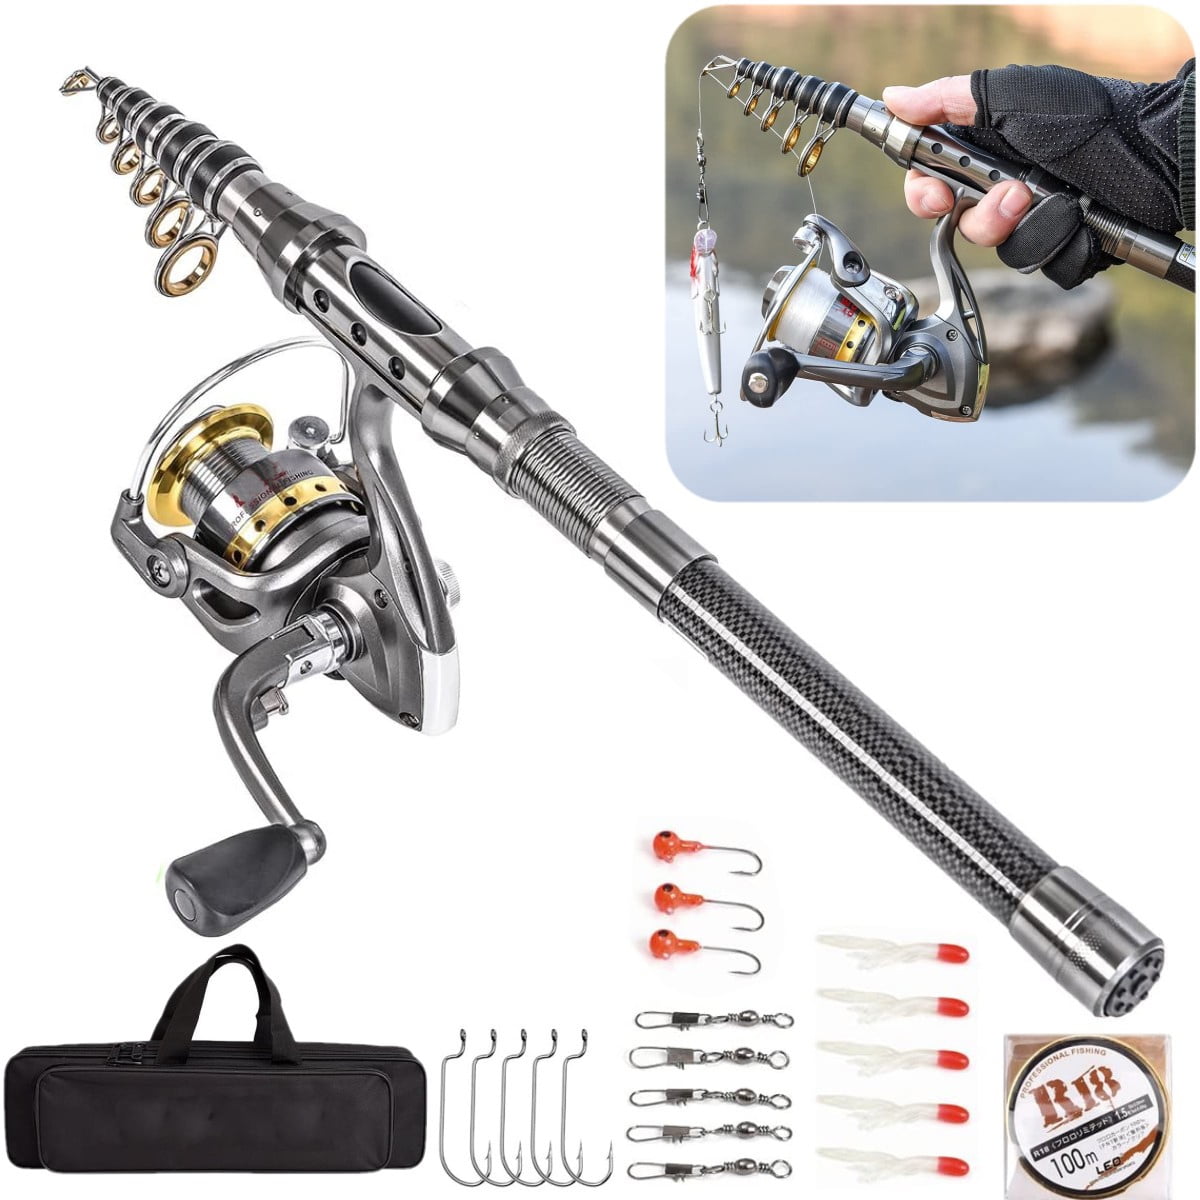 Oture Telescopic Fishing Pole Fishing Rod And Reel Combos, 48% OFF